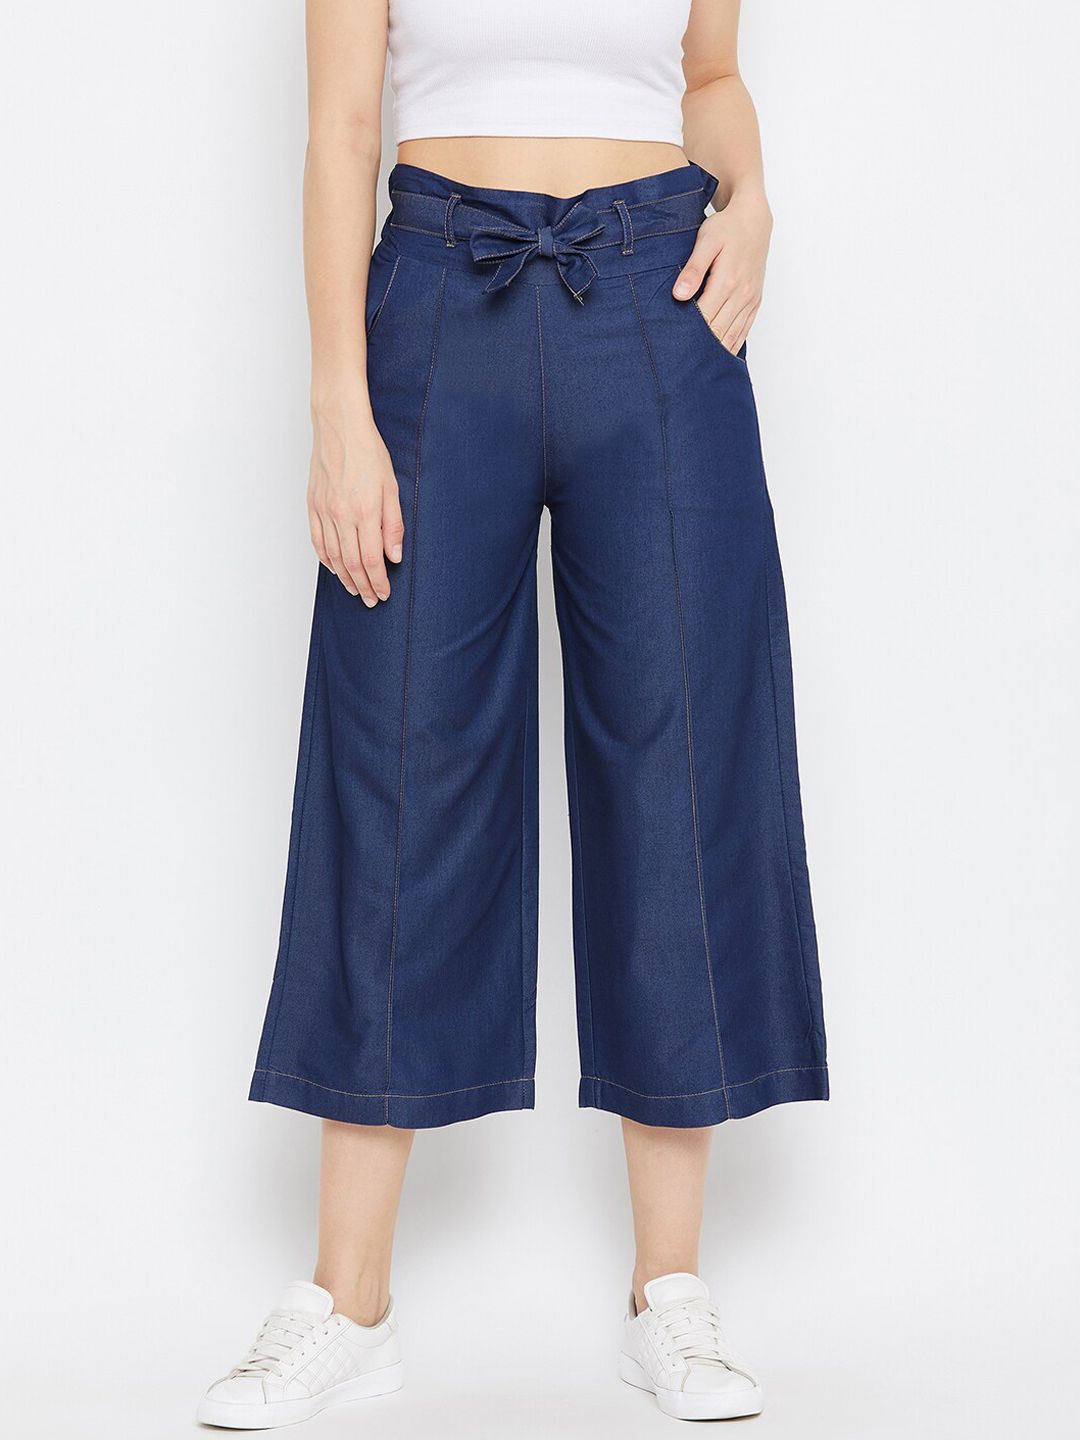 Clora Creation Women Navy Blue Solid Regular Fit Culottes Trousers Price in India